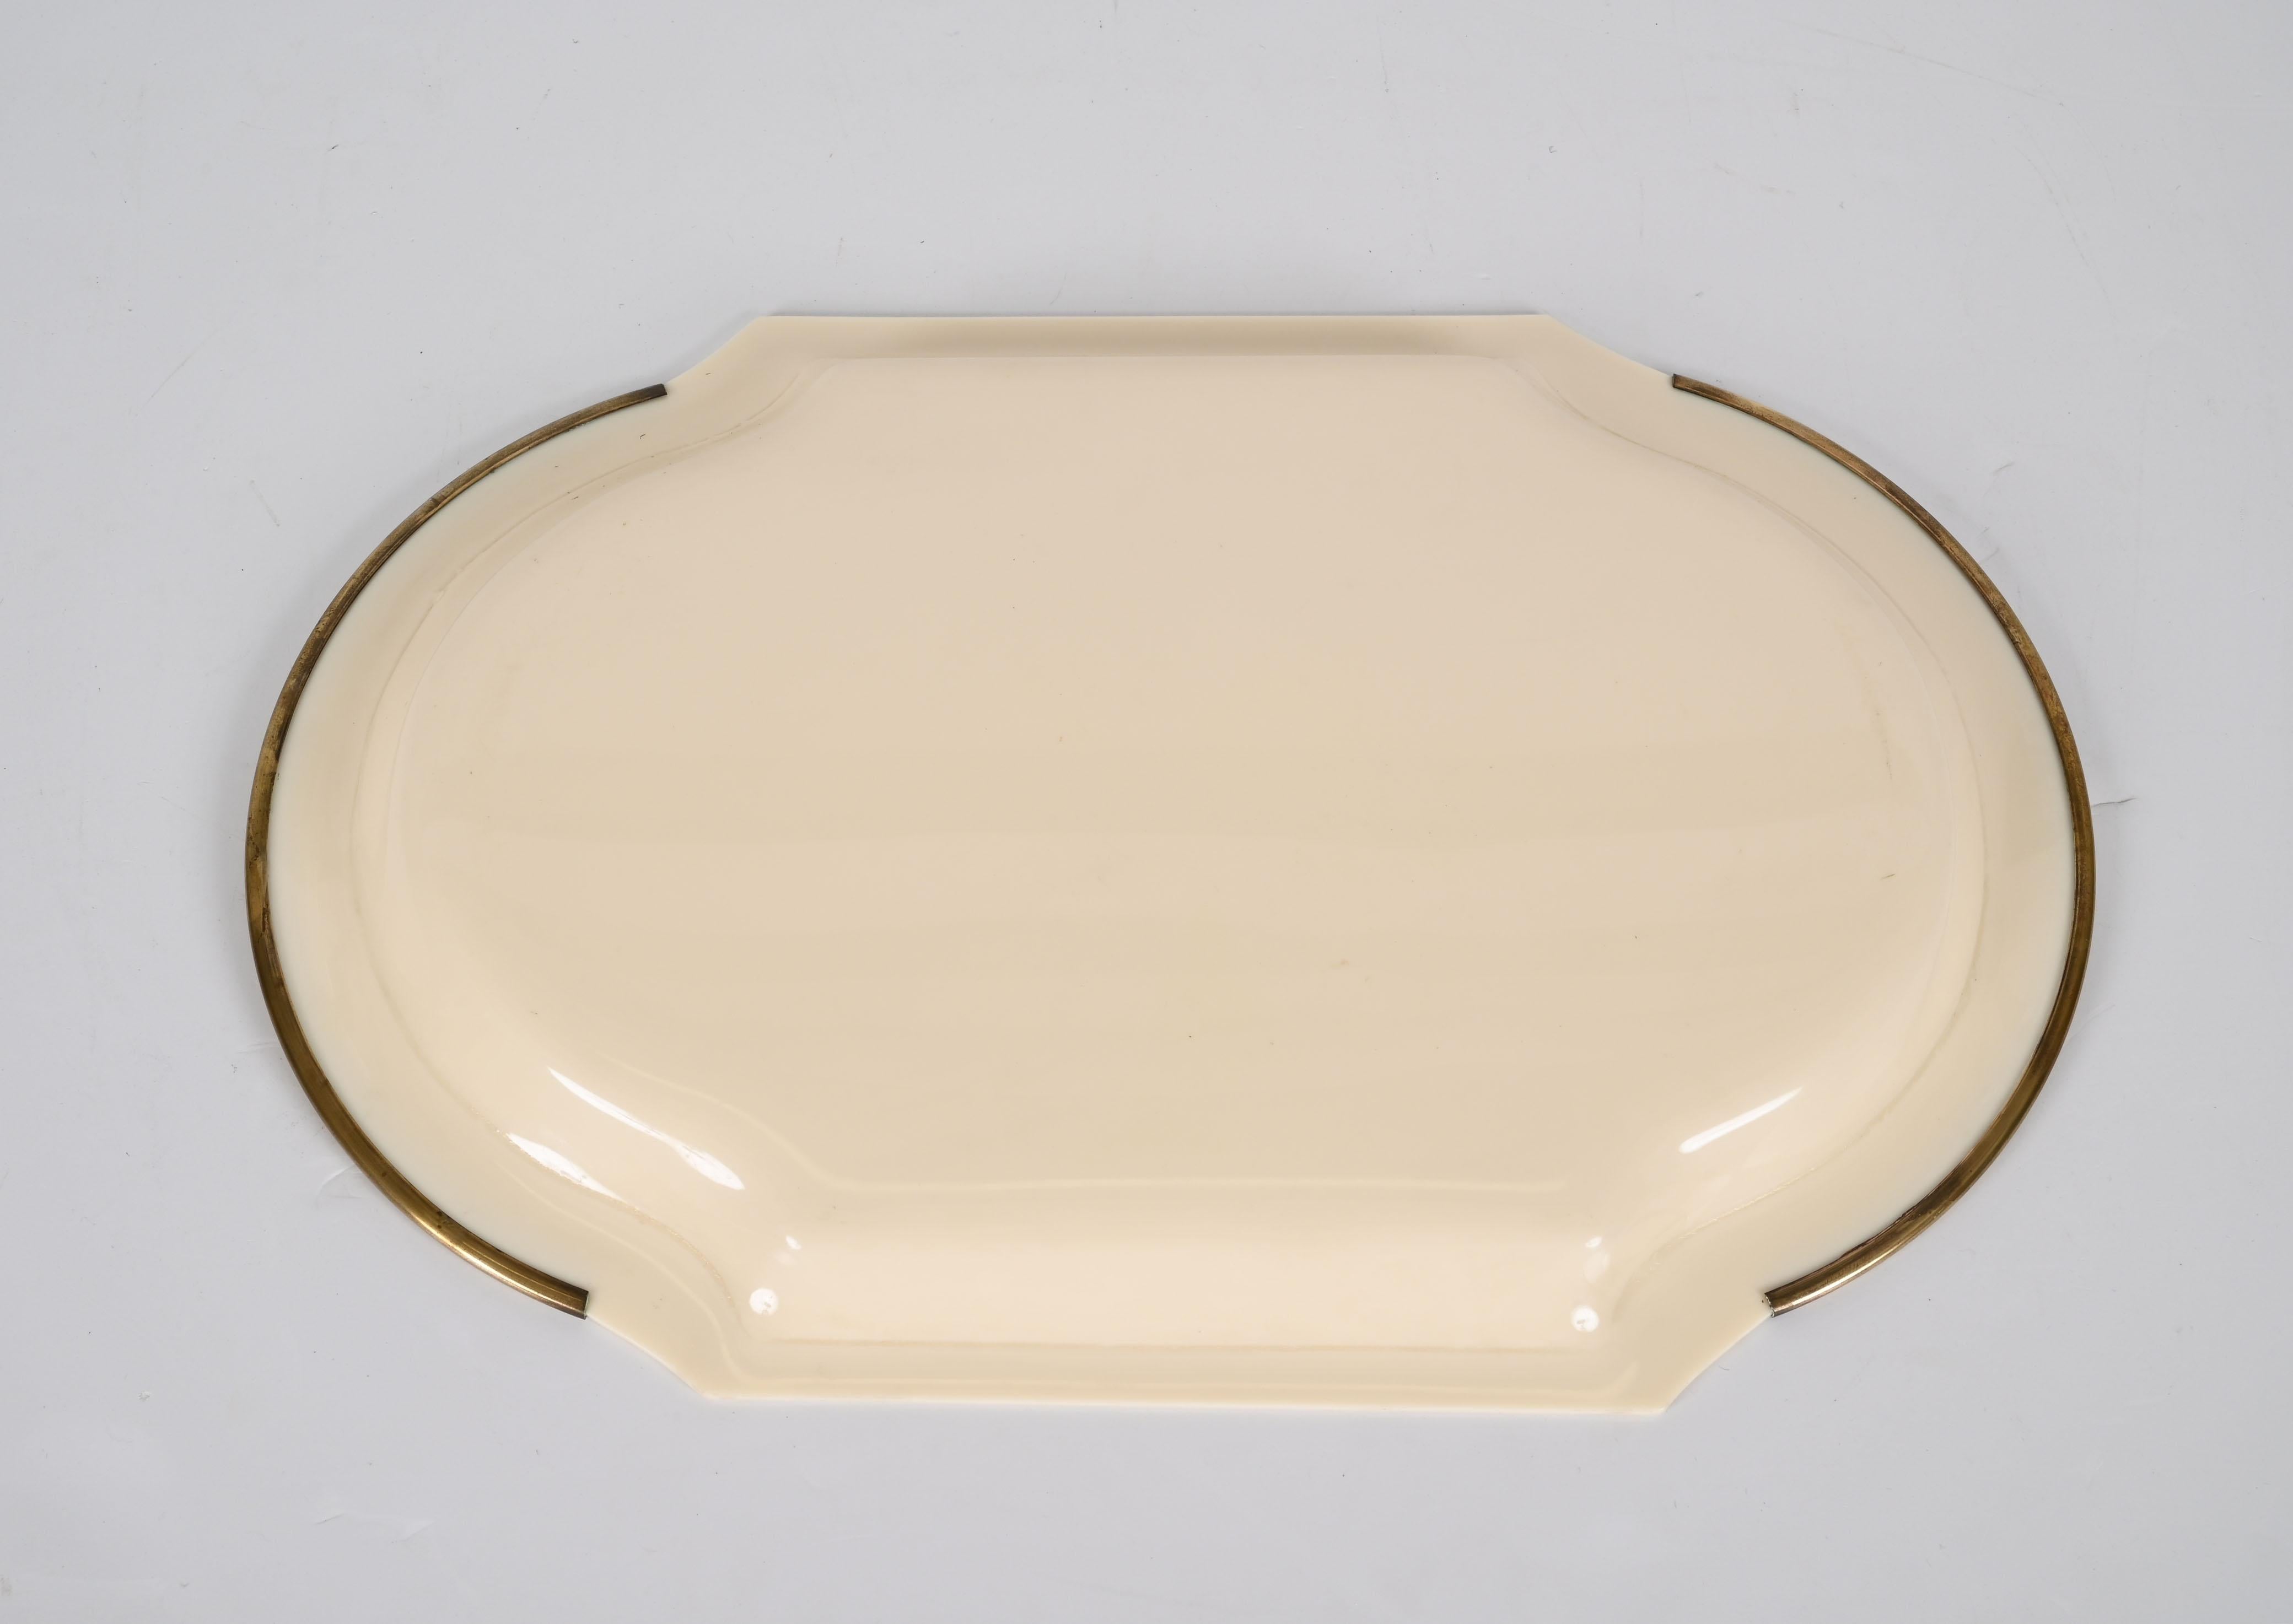 Mid-Century Oval Serving Tray in Brass and Cream-Colored Plexiglass, Italy 1980s For Sale 4